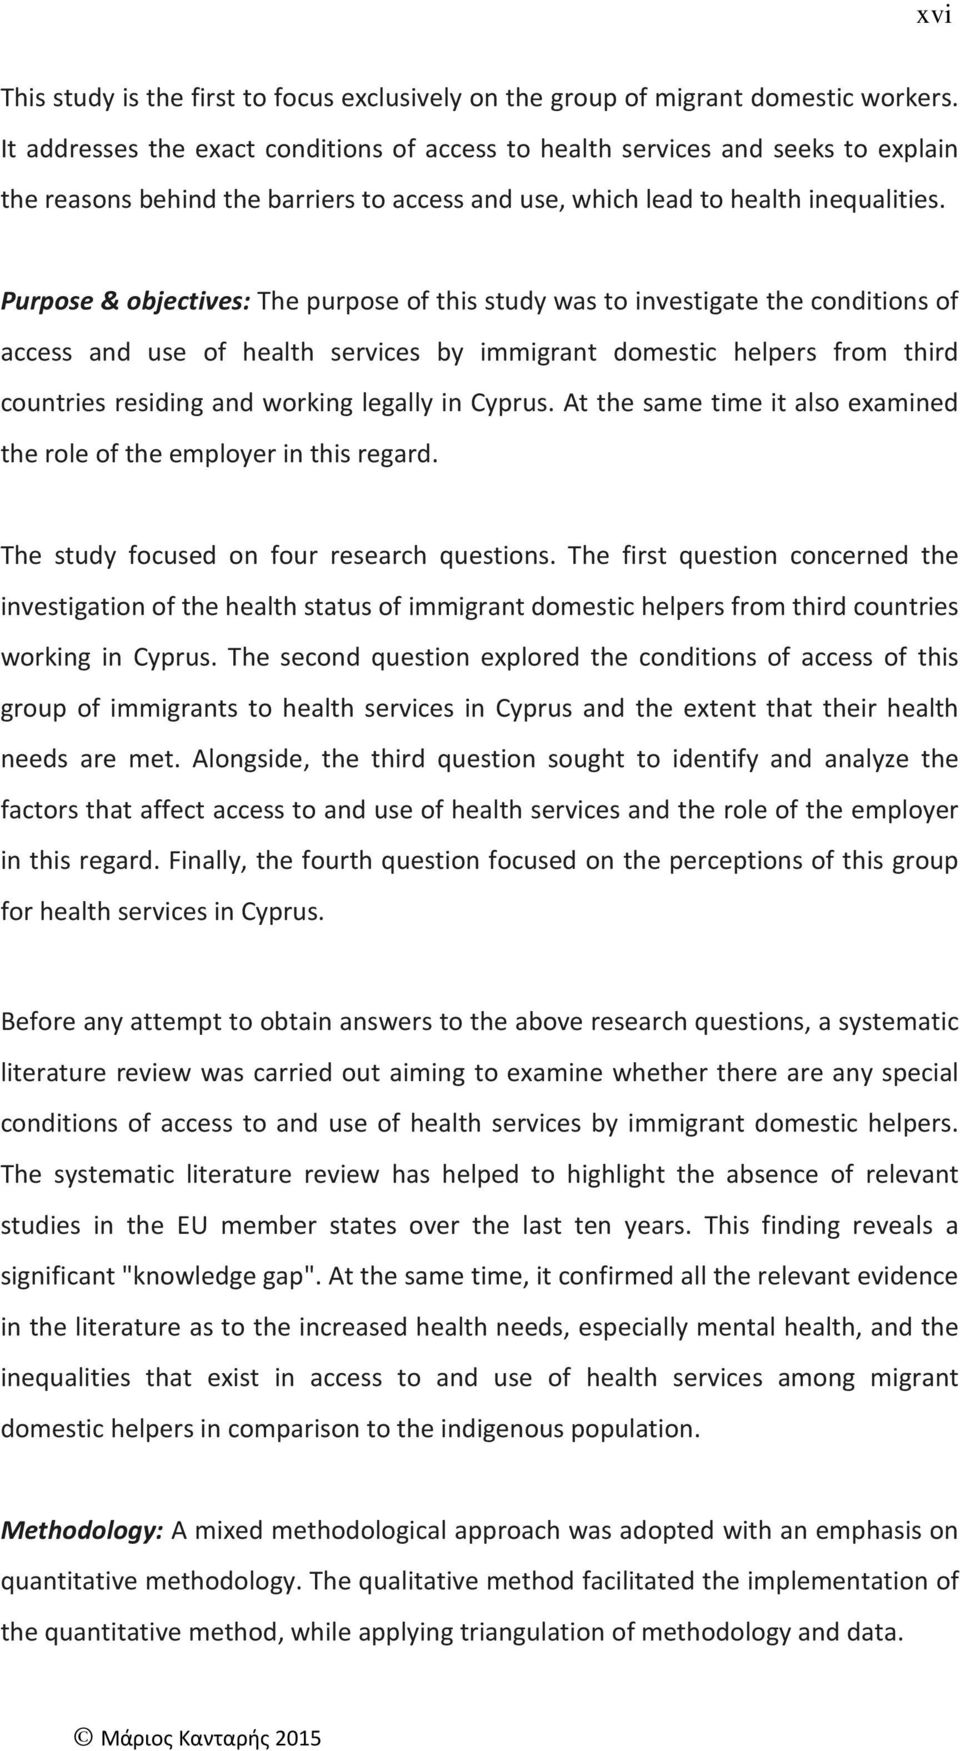 Purpose & objectives: The purpose of this study was to investigate the conditions of access and use of health services by immigrant domestic helpers from third countries residing and working legally